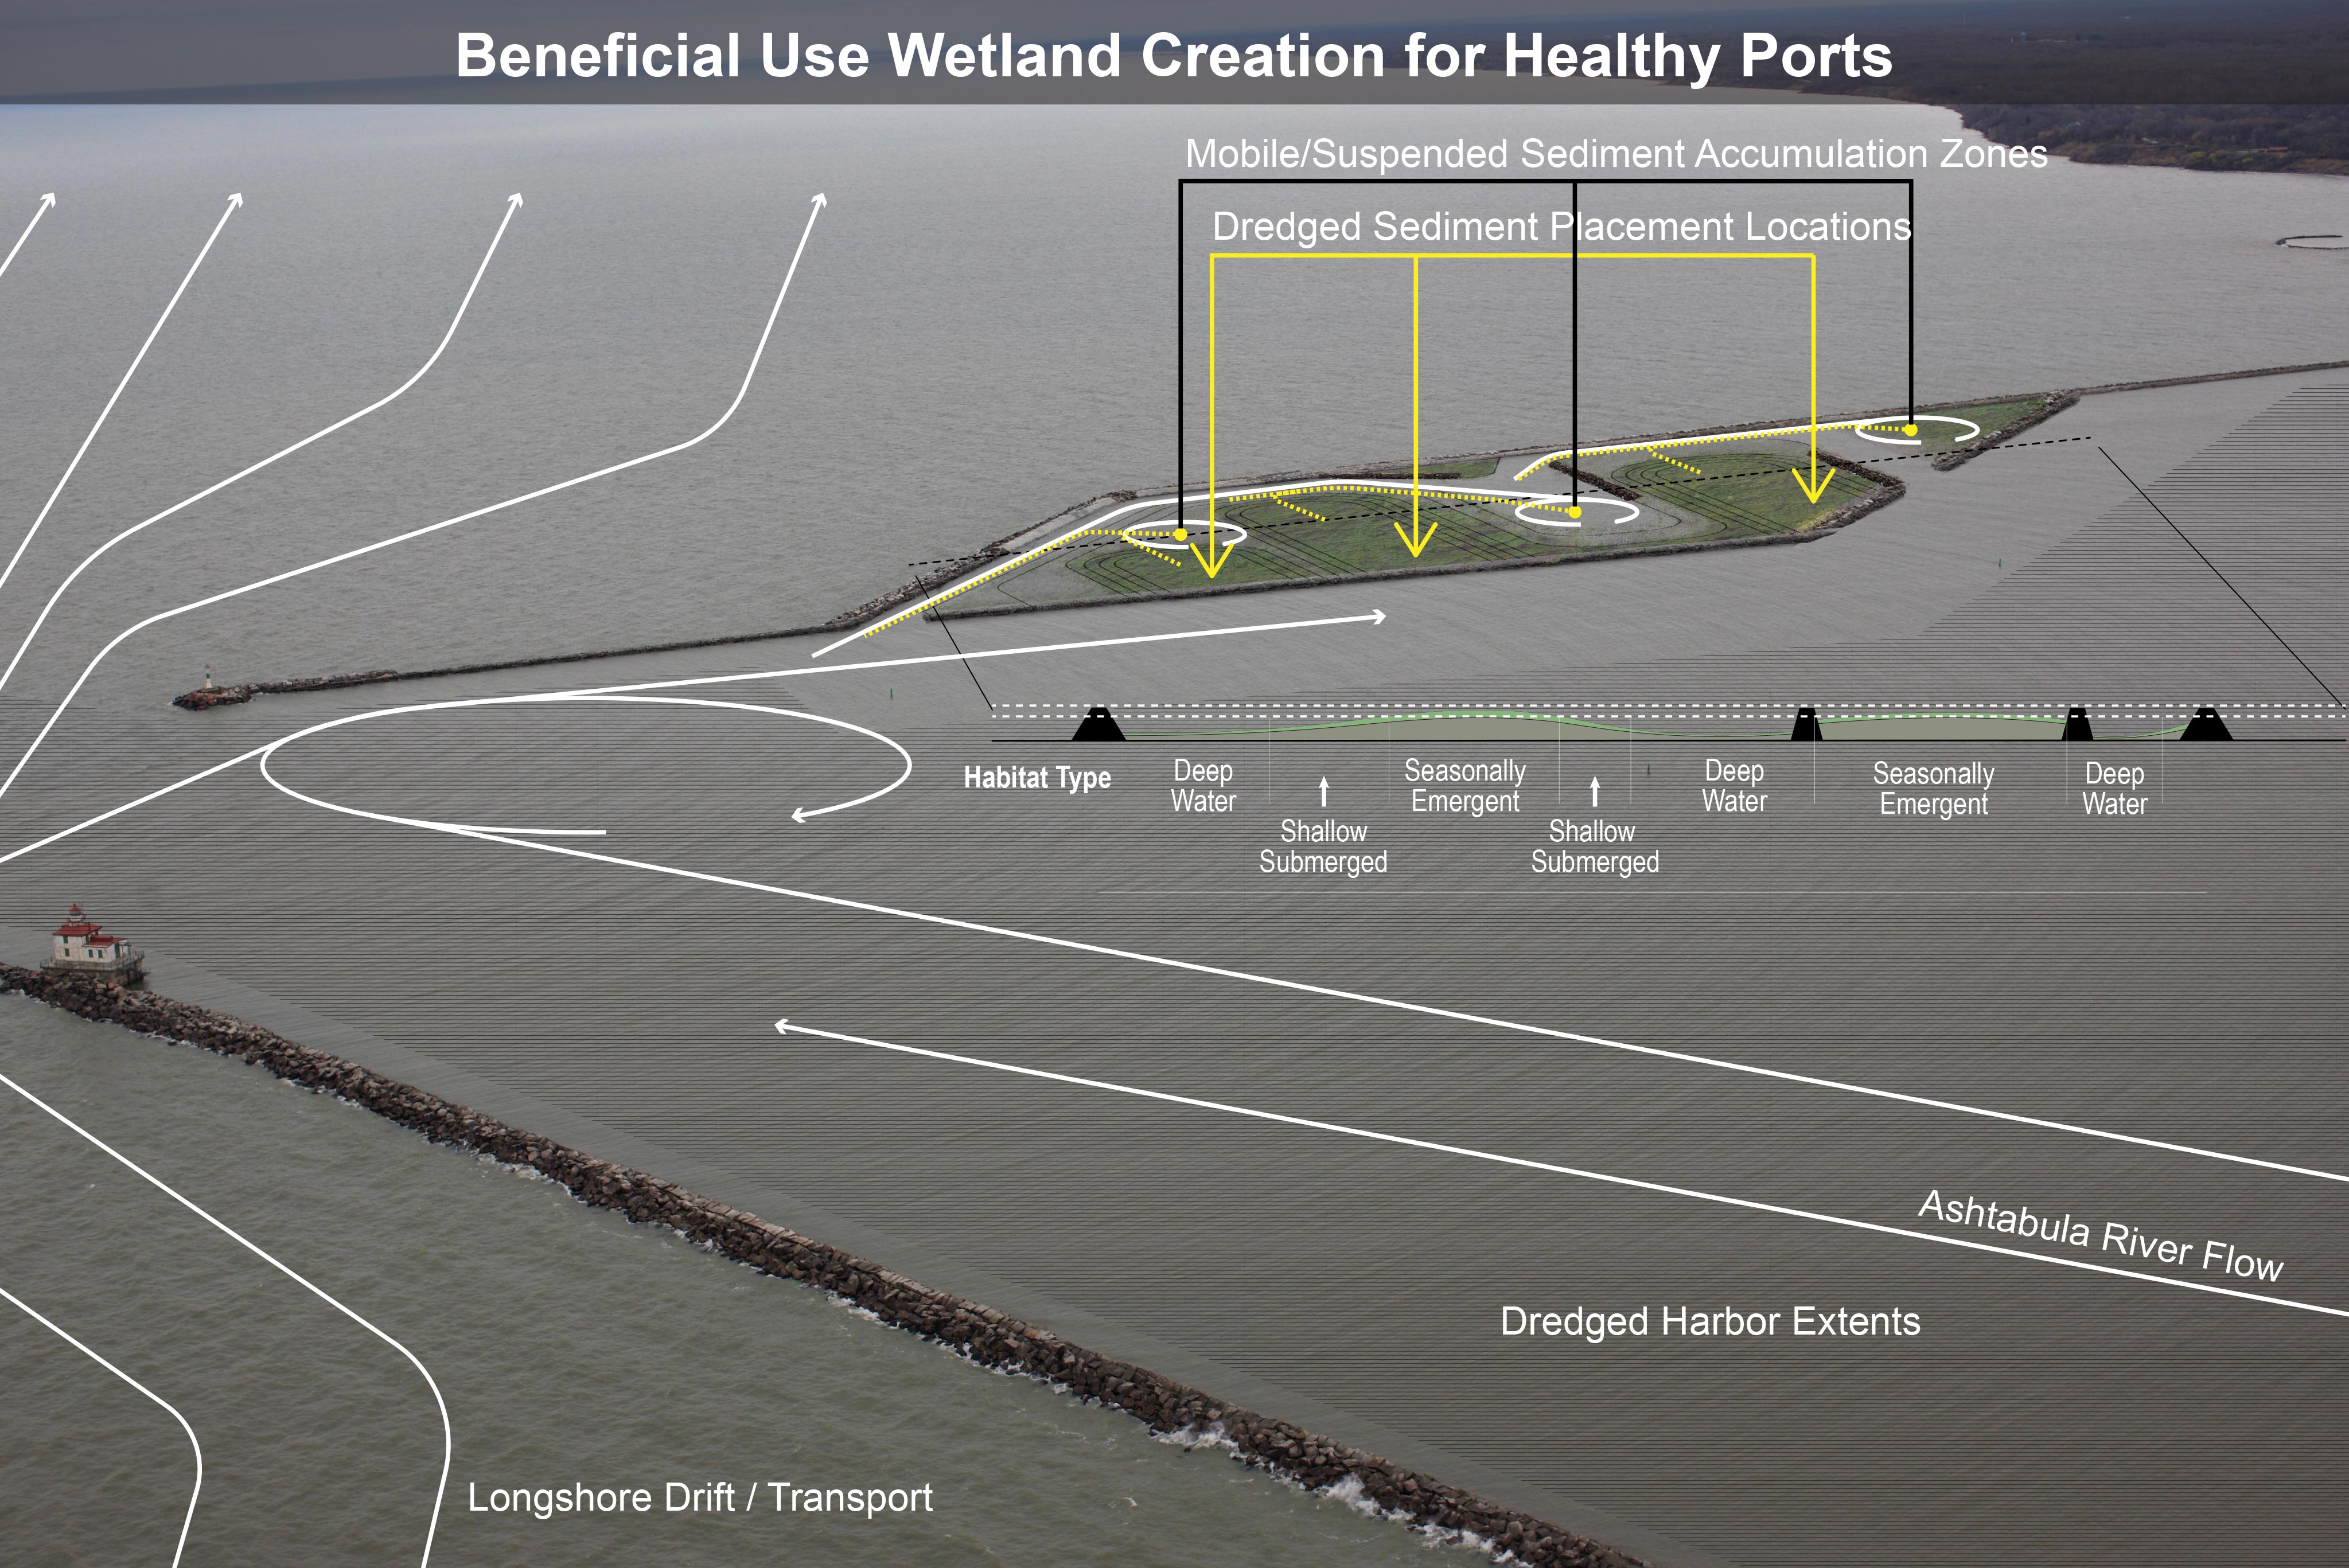 Beneficial Use Wetland Creation for Healthy Ports